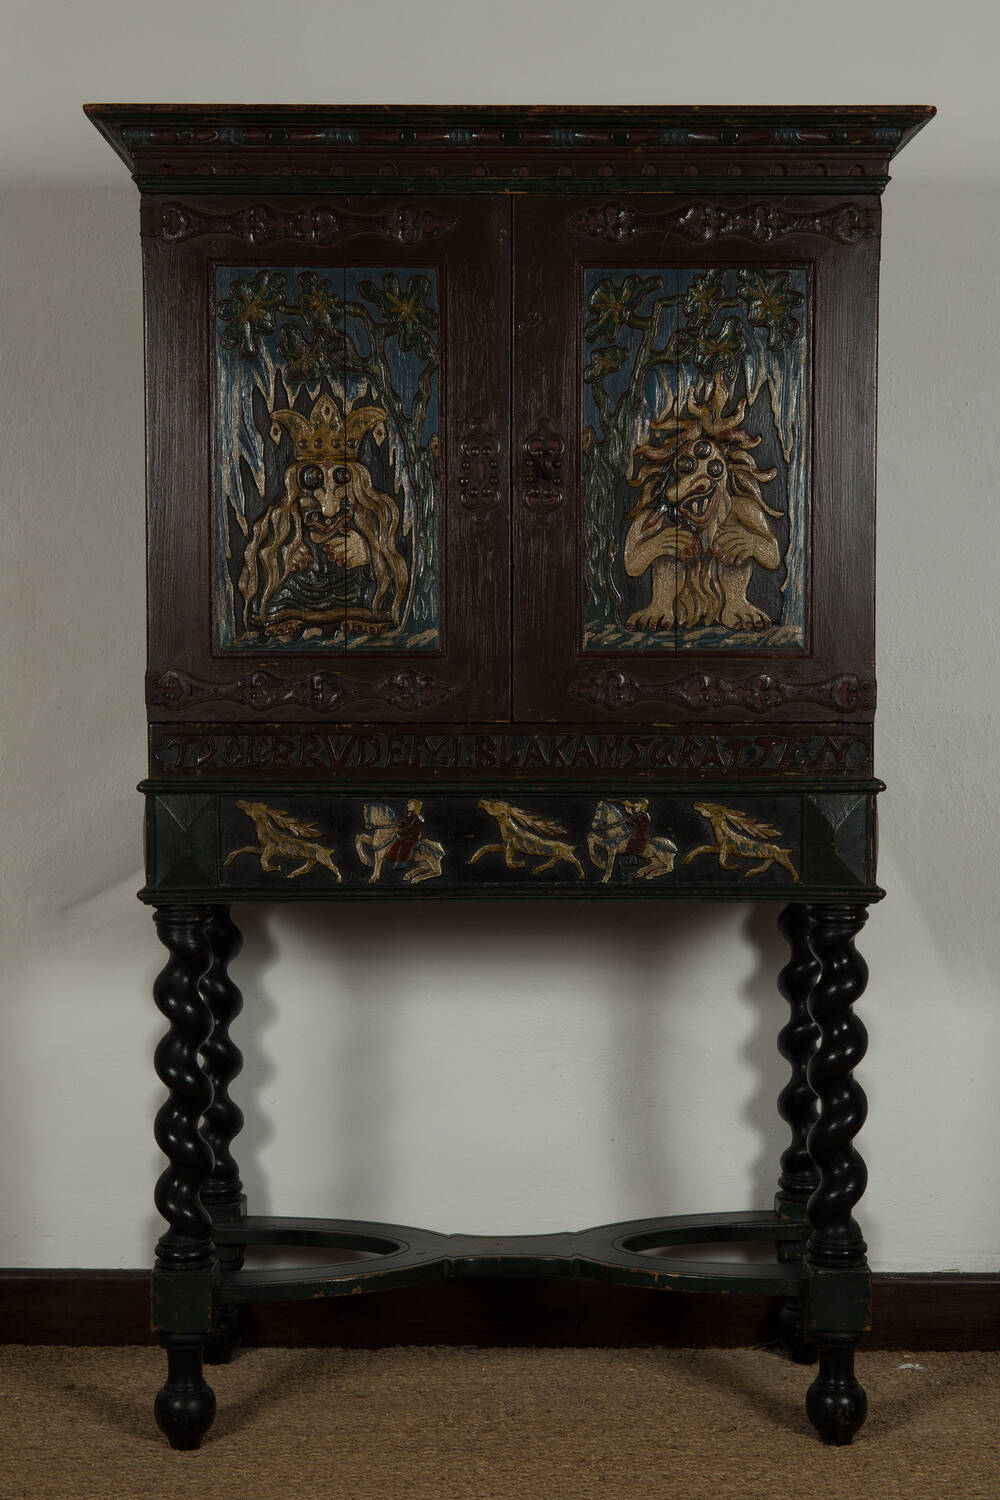 A tall, dark wooden cabinet with spindle legs. The doors are adorned with carvings of trolls, and carvings of horses run along the bottom of the cabinet.